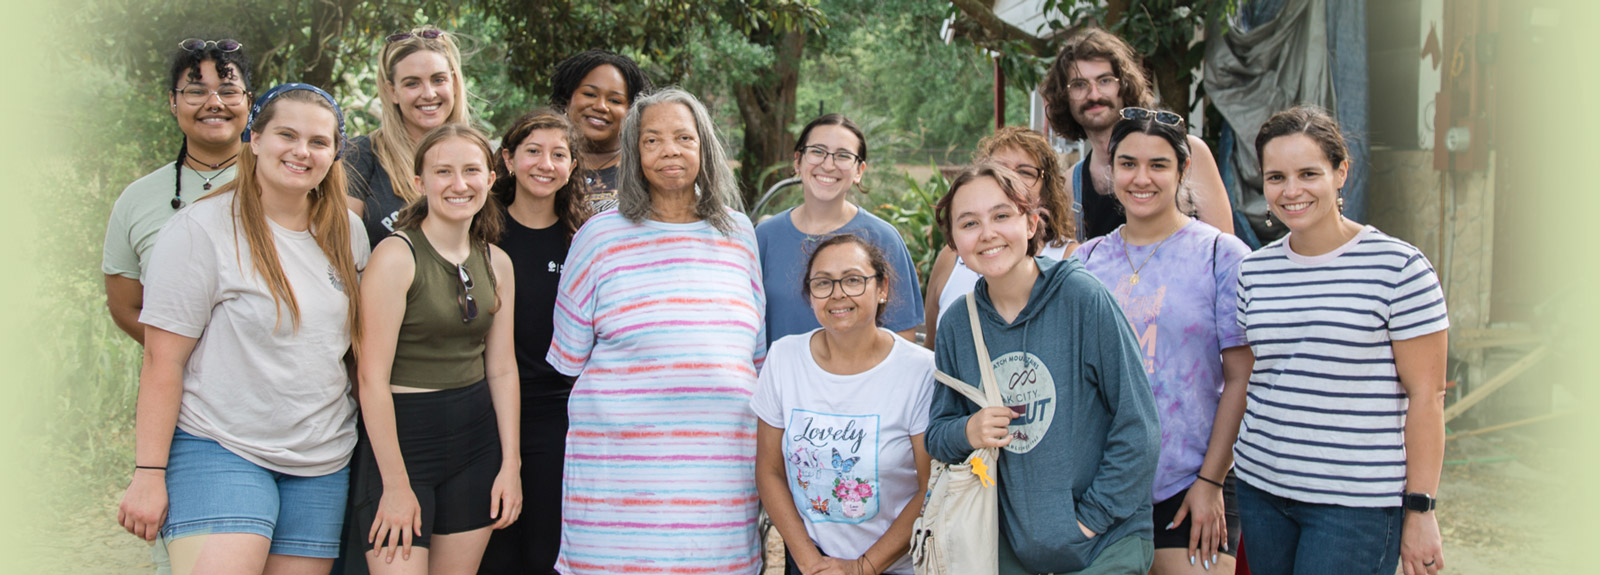 Students, faculty and community members pose during a service learning event